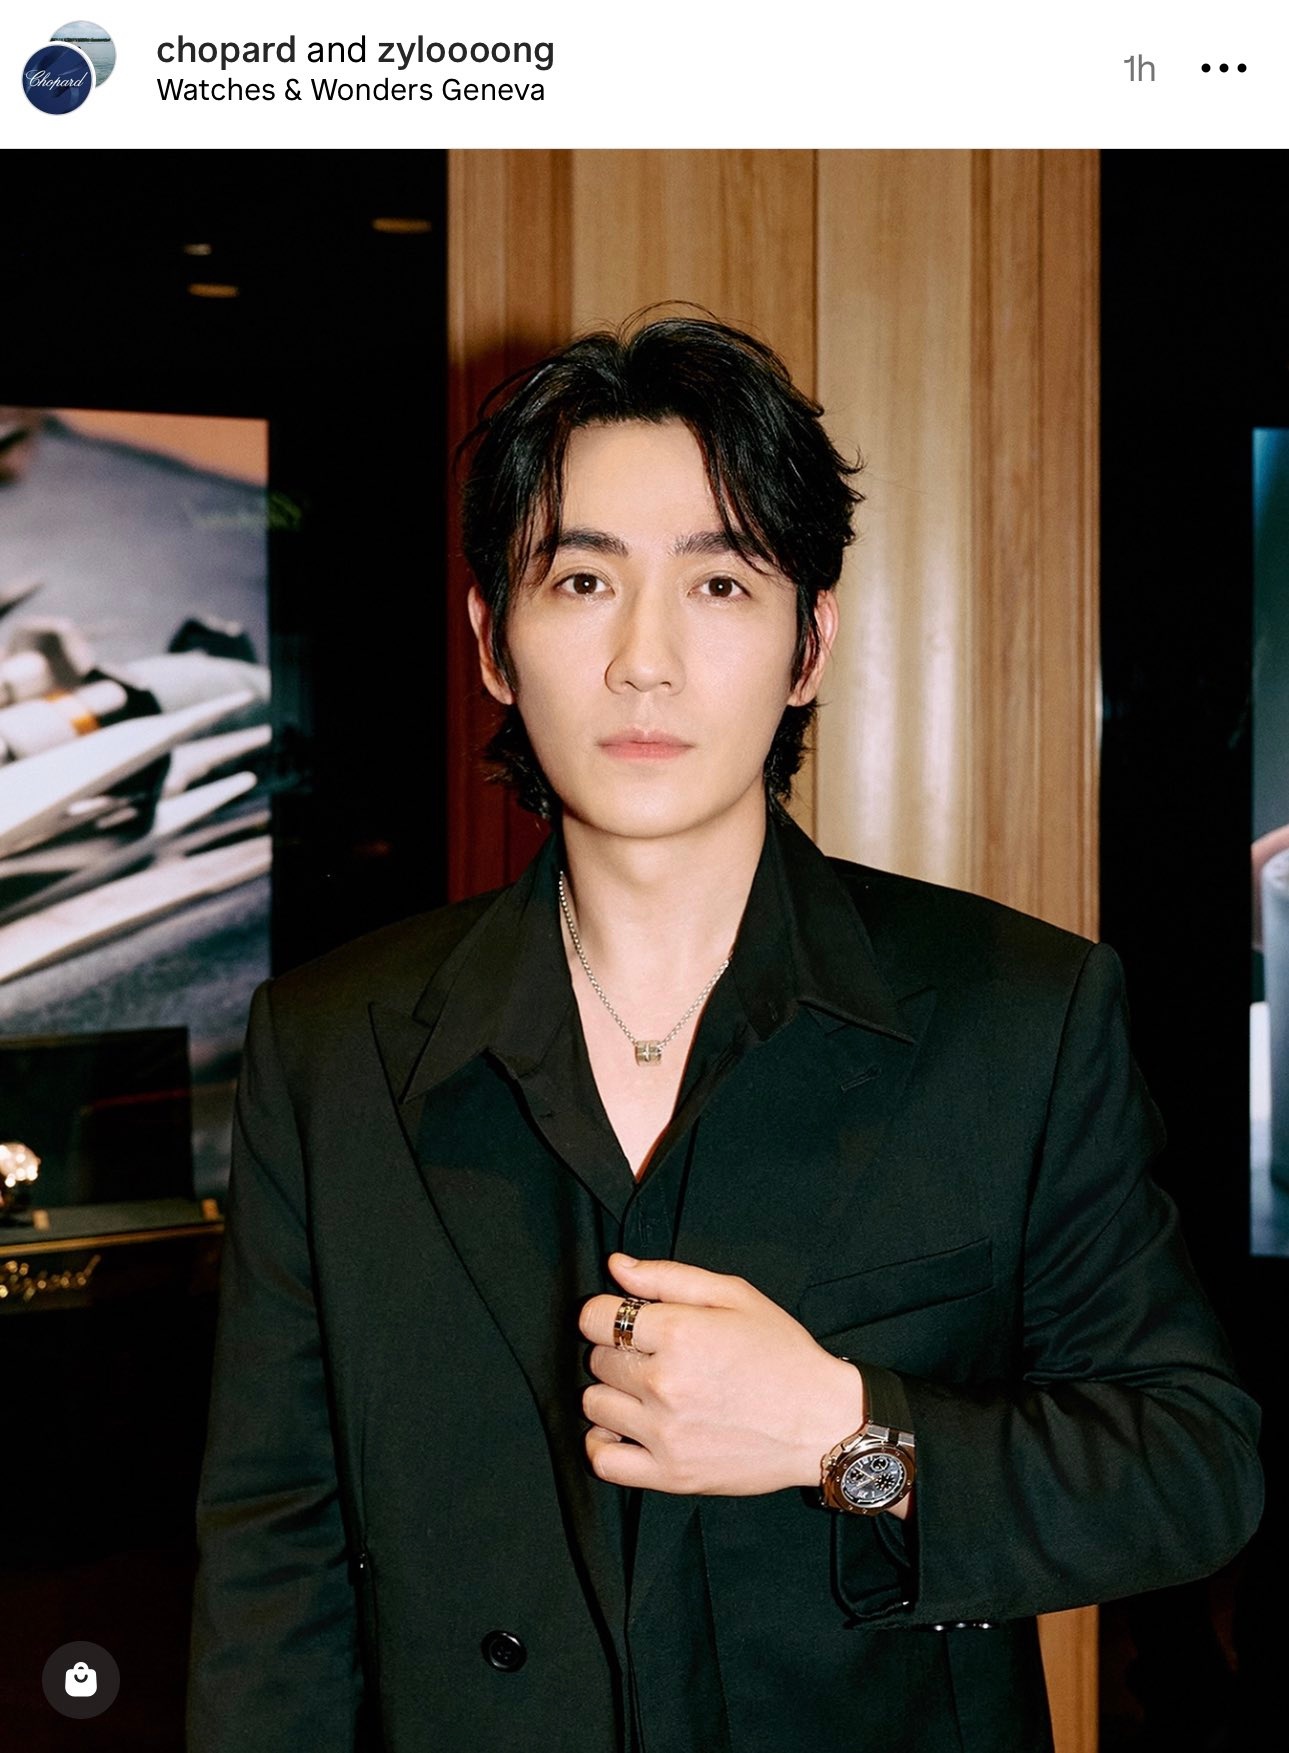 Chinese actor Zhu Yilong poses at this year’s Watches & Wonders event. Photo: Chopard